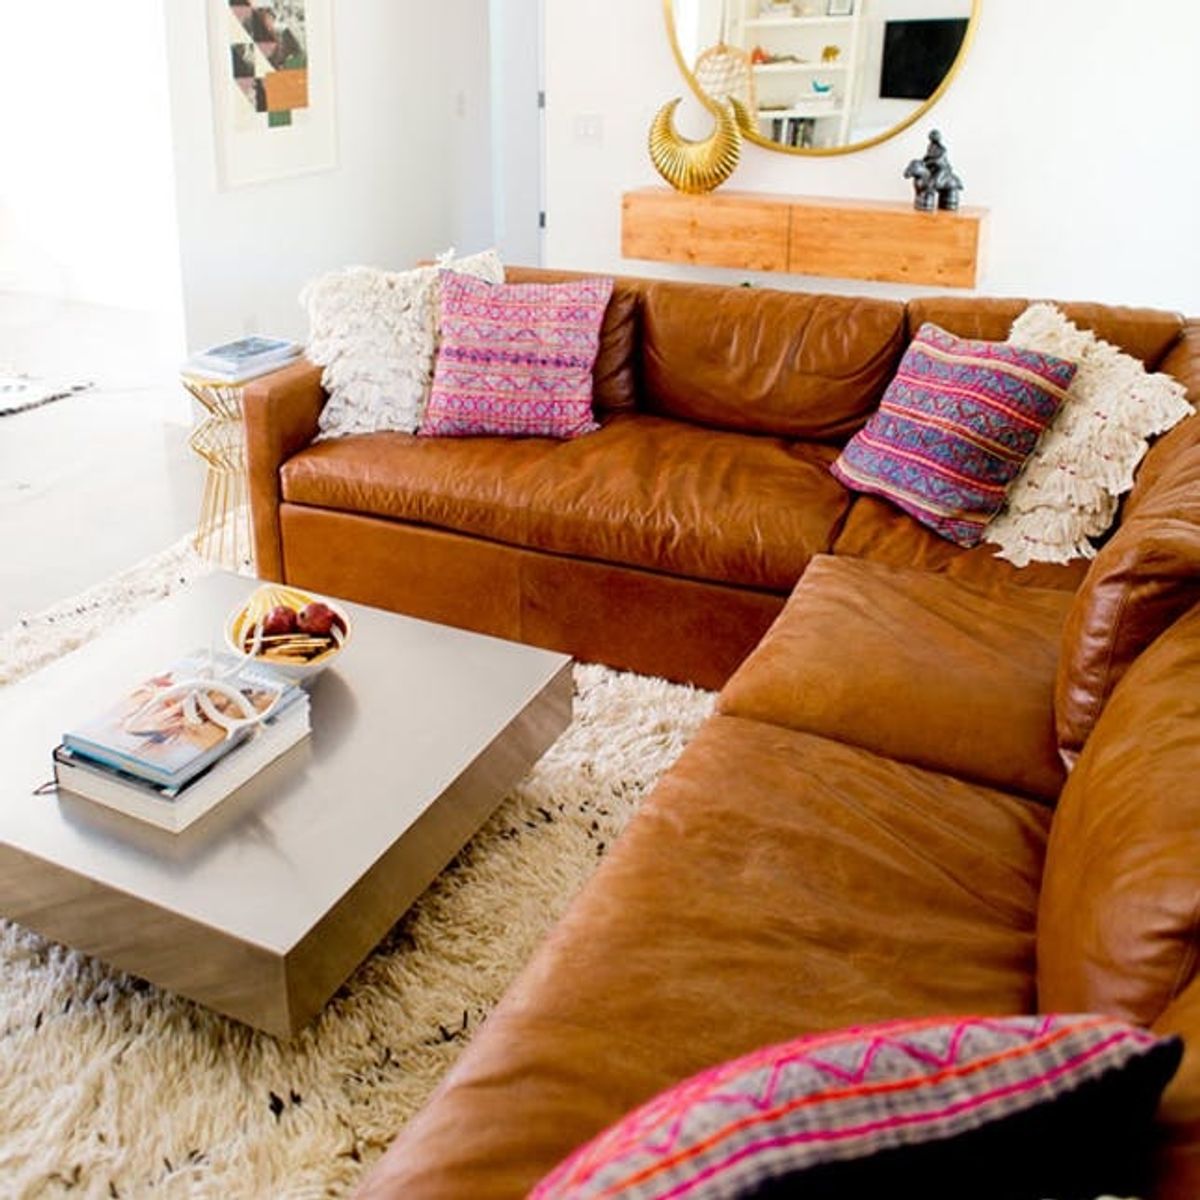 9 Ways to Rock the Leather Sofa Trend That’s Taking Over Instagram